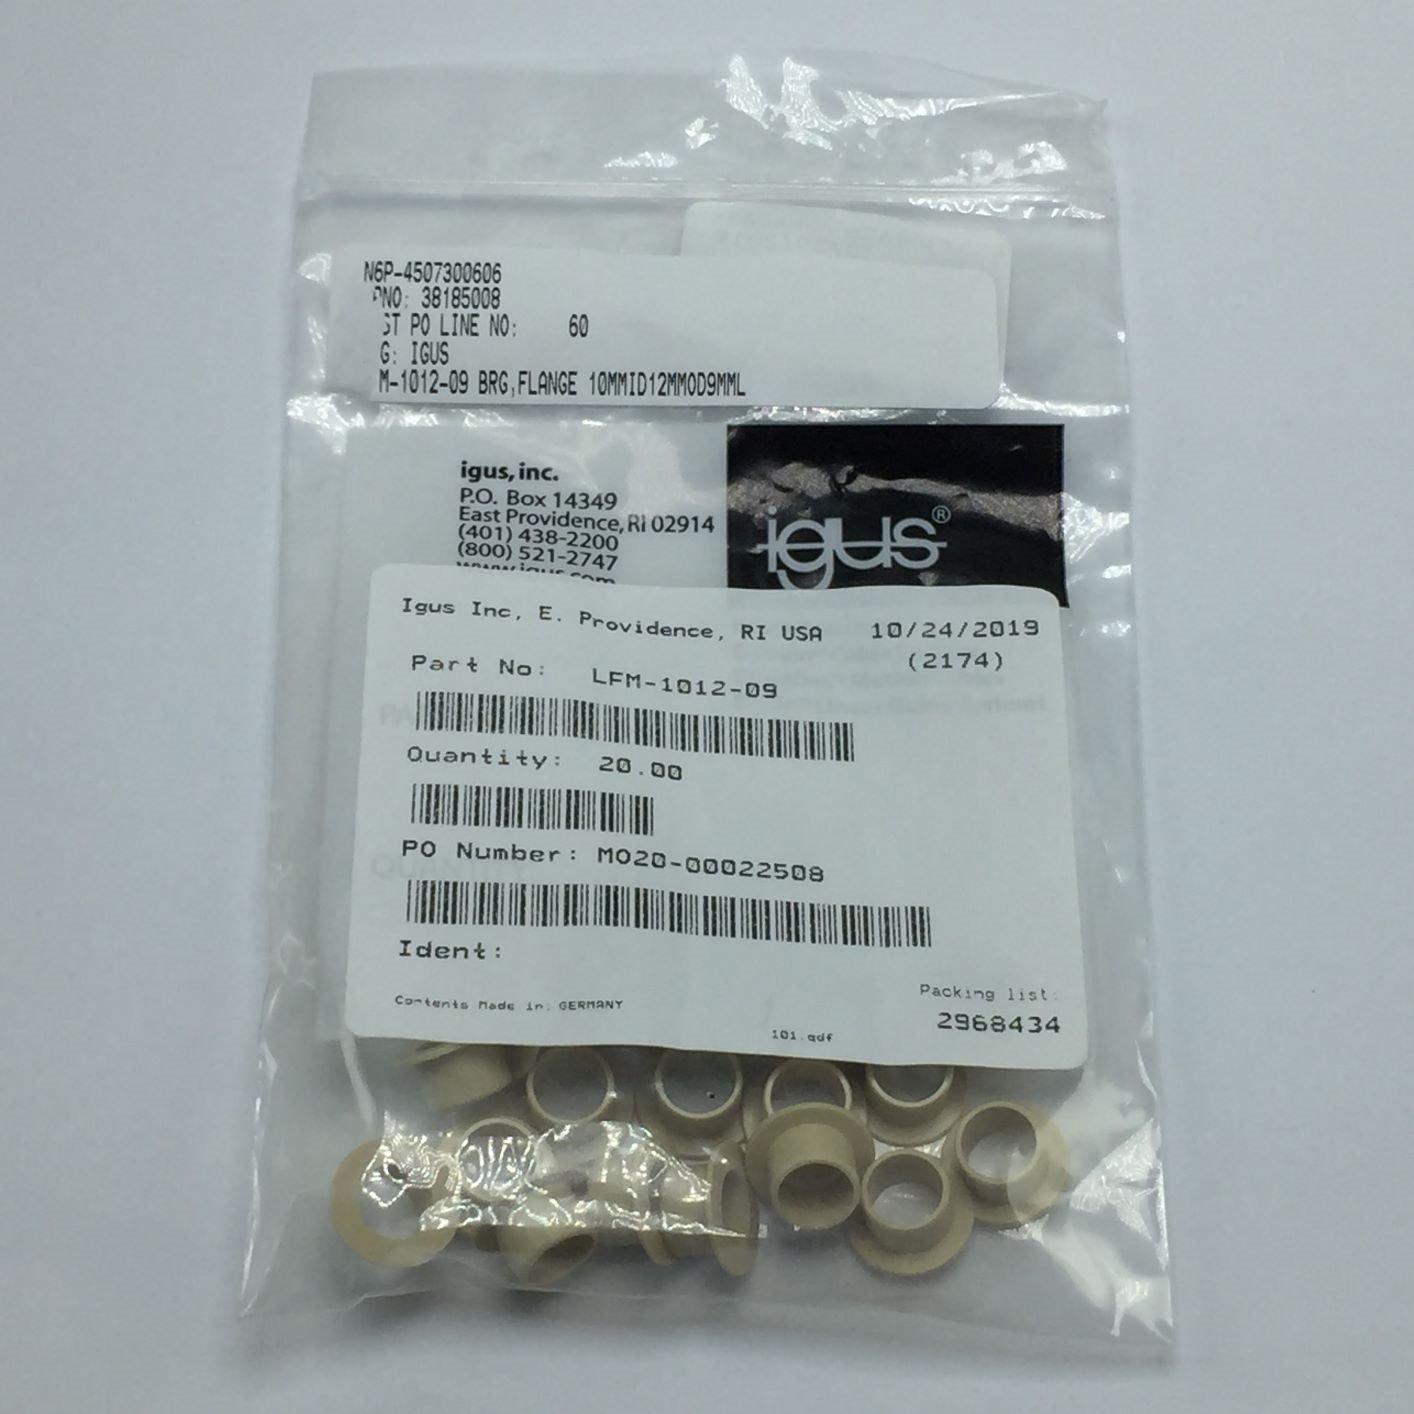 NEW IGUS LFM-1012-09 NEW IGLIDE L280 SLEEVE BEARING WITH FLANGE BORE 10MM QTY 20